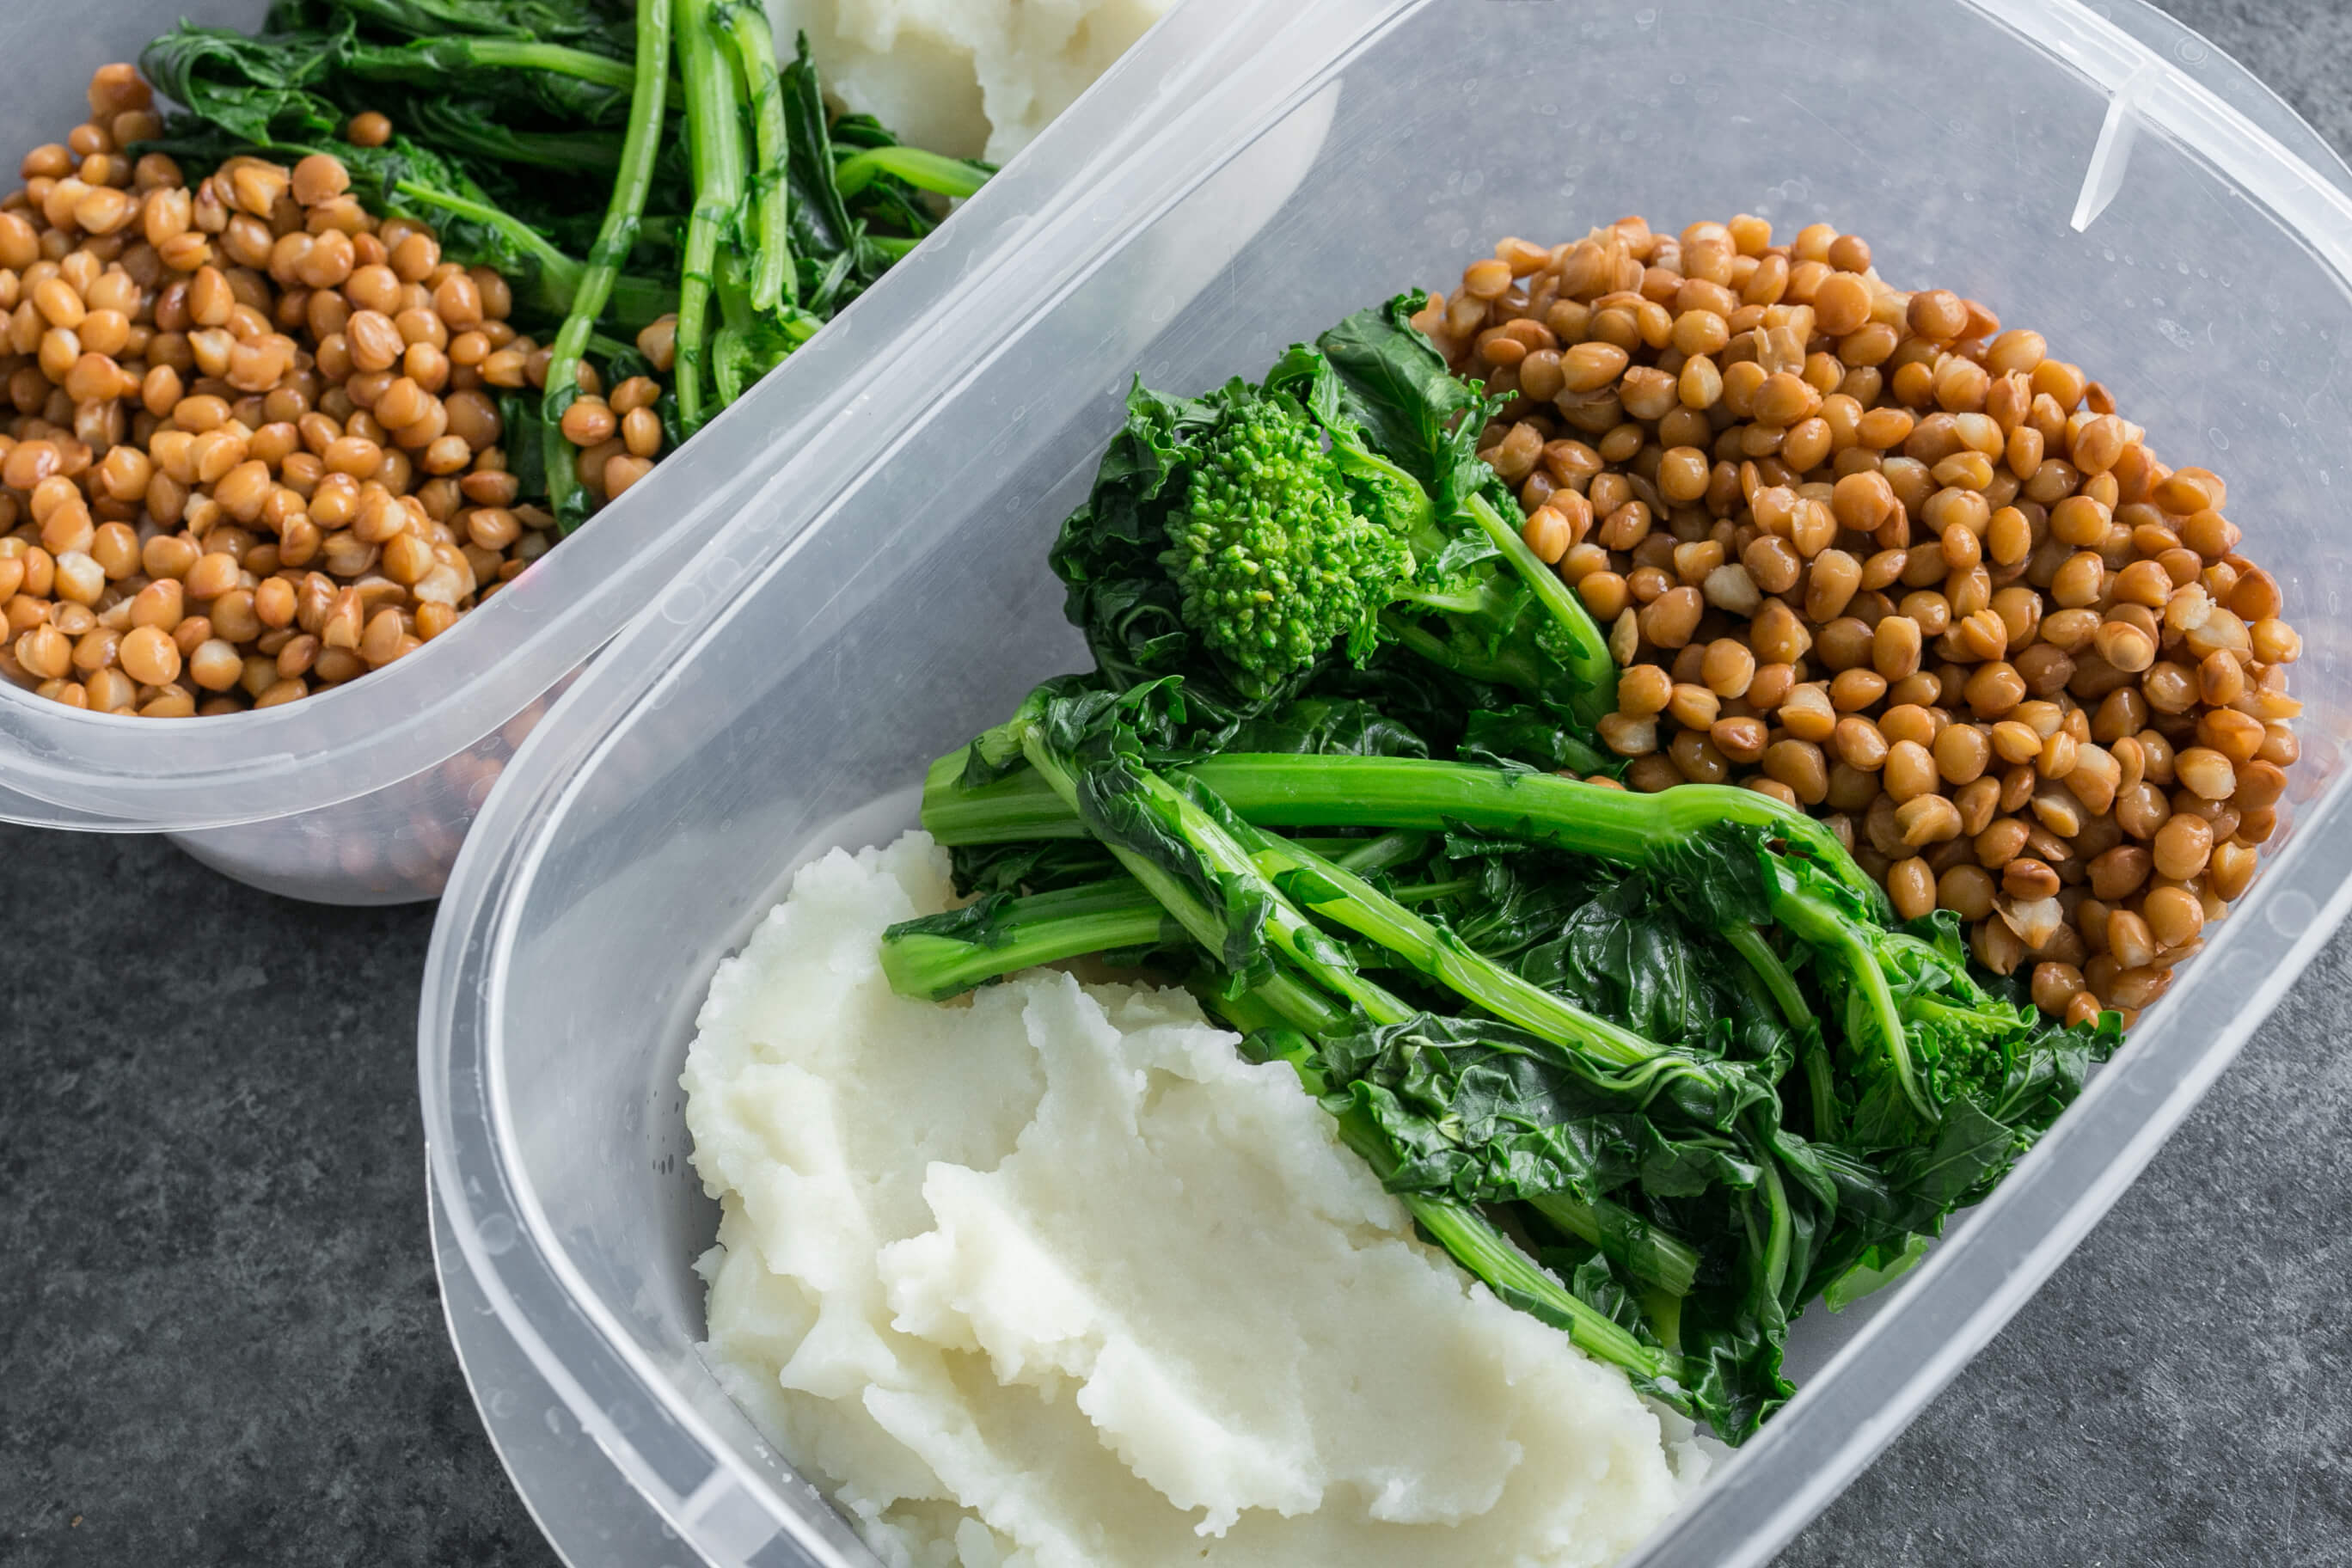 20 Simple Meals to Help Your Clients Hit Their Macros: Lentils, Rapini & Mashed Potatoes